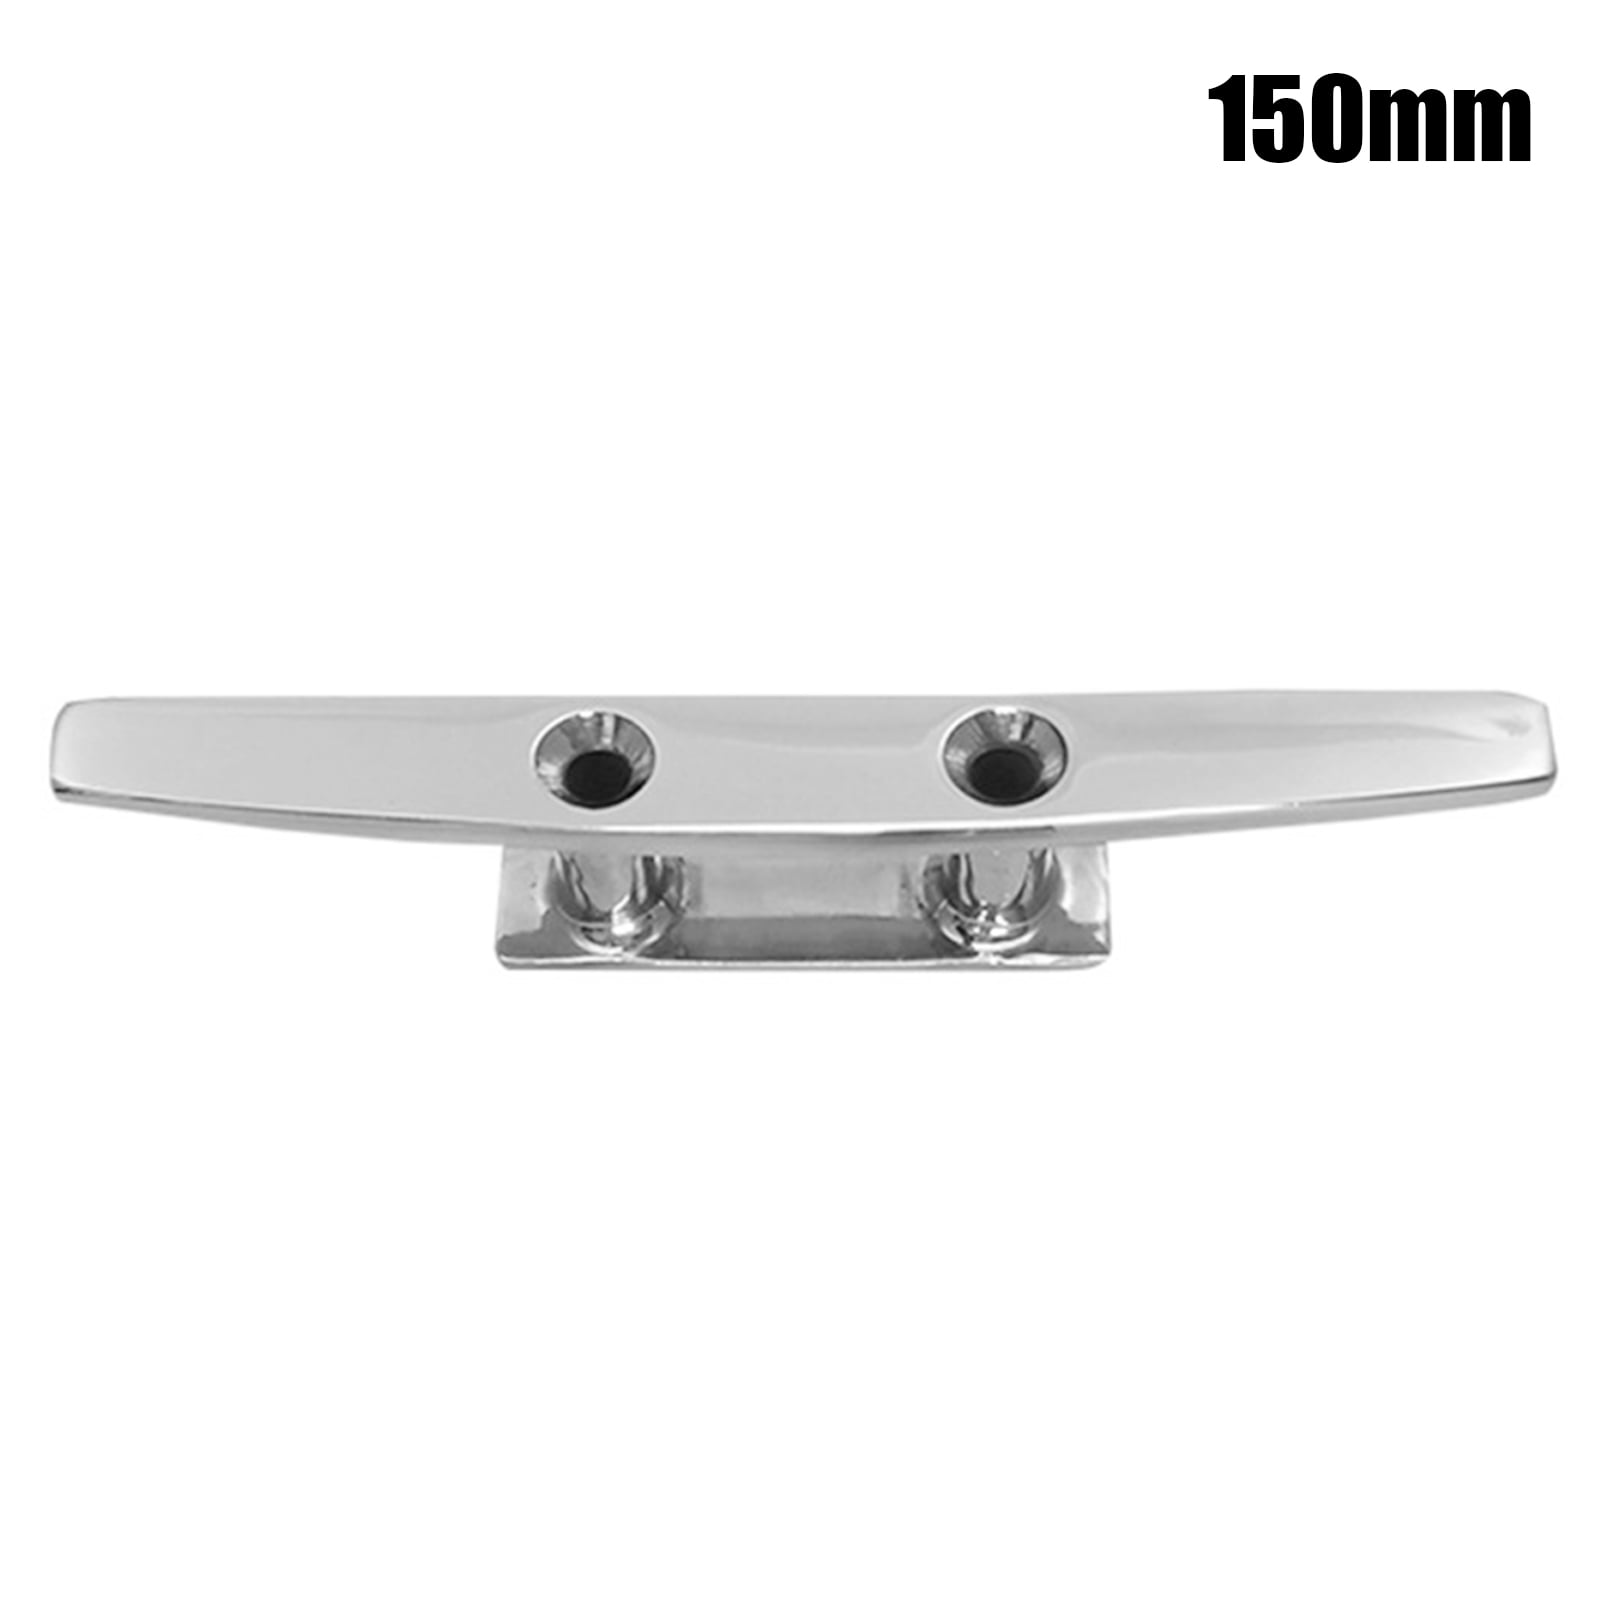 Stainless Steel Boat Cleat Marine Boat Yacht Mooring Deck Cleat 4/5/6/8 Inch 